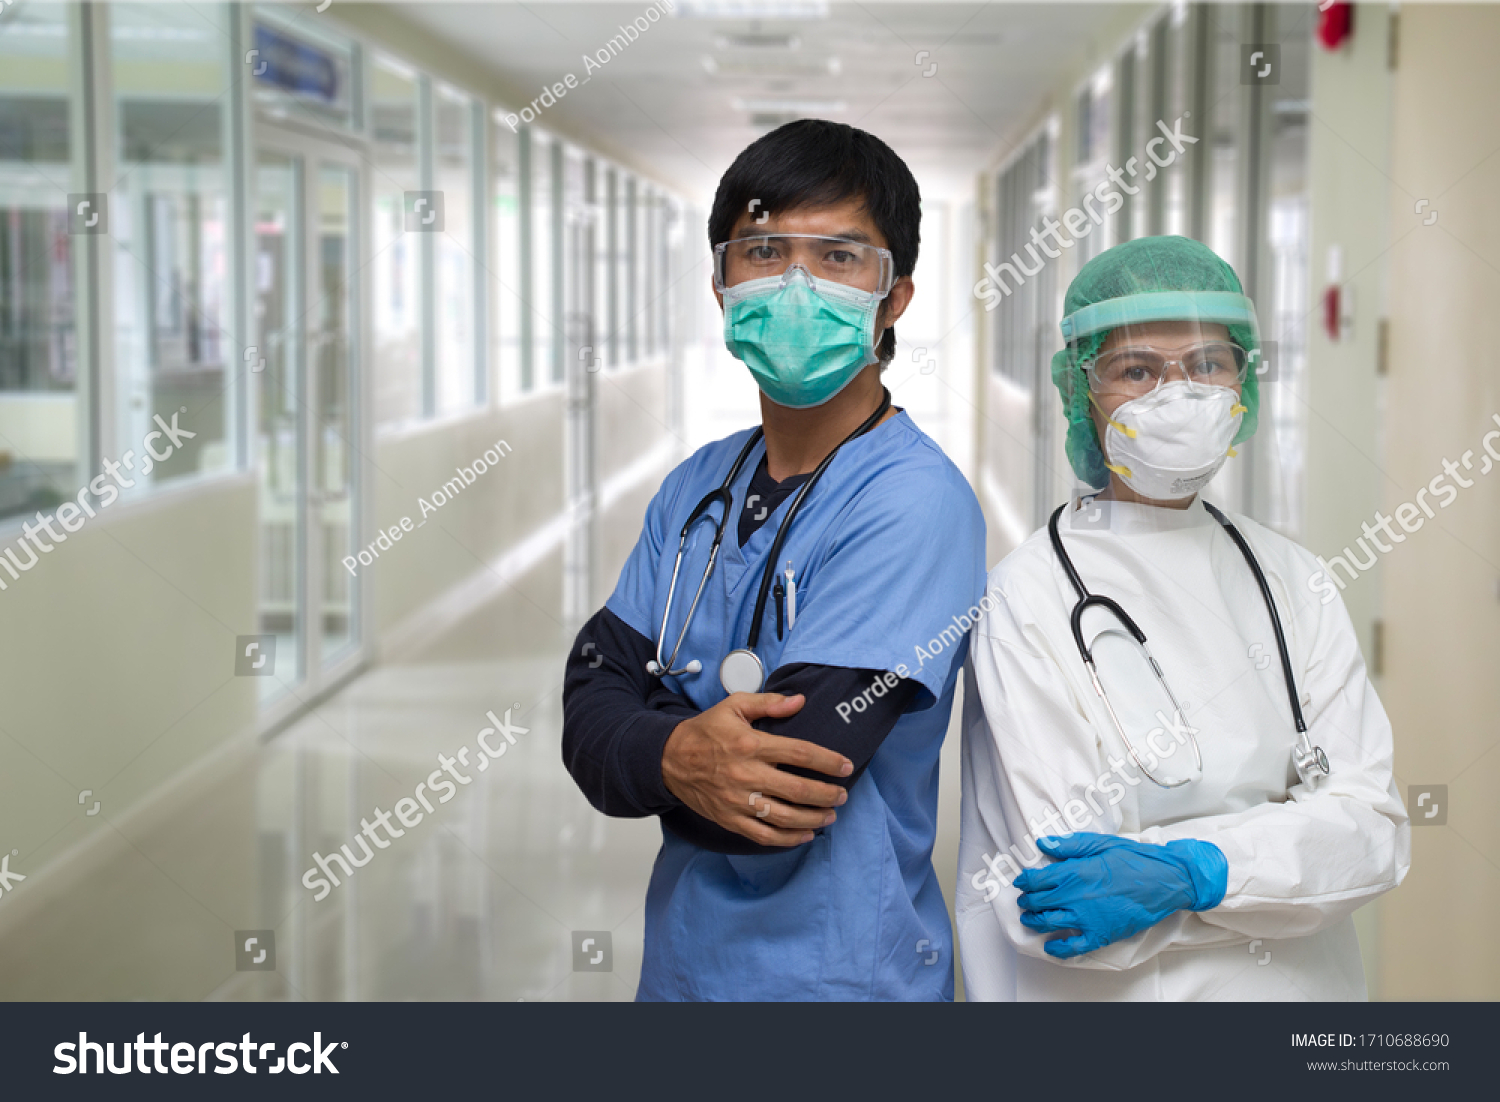 Covid-19  situation: portrait of a Asian young man and woman nurse/ Doctor wearing Personal protective Equipment(PPE) and standing with they arms crossed #1710688690